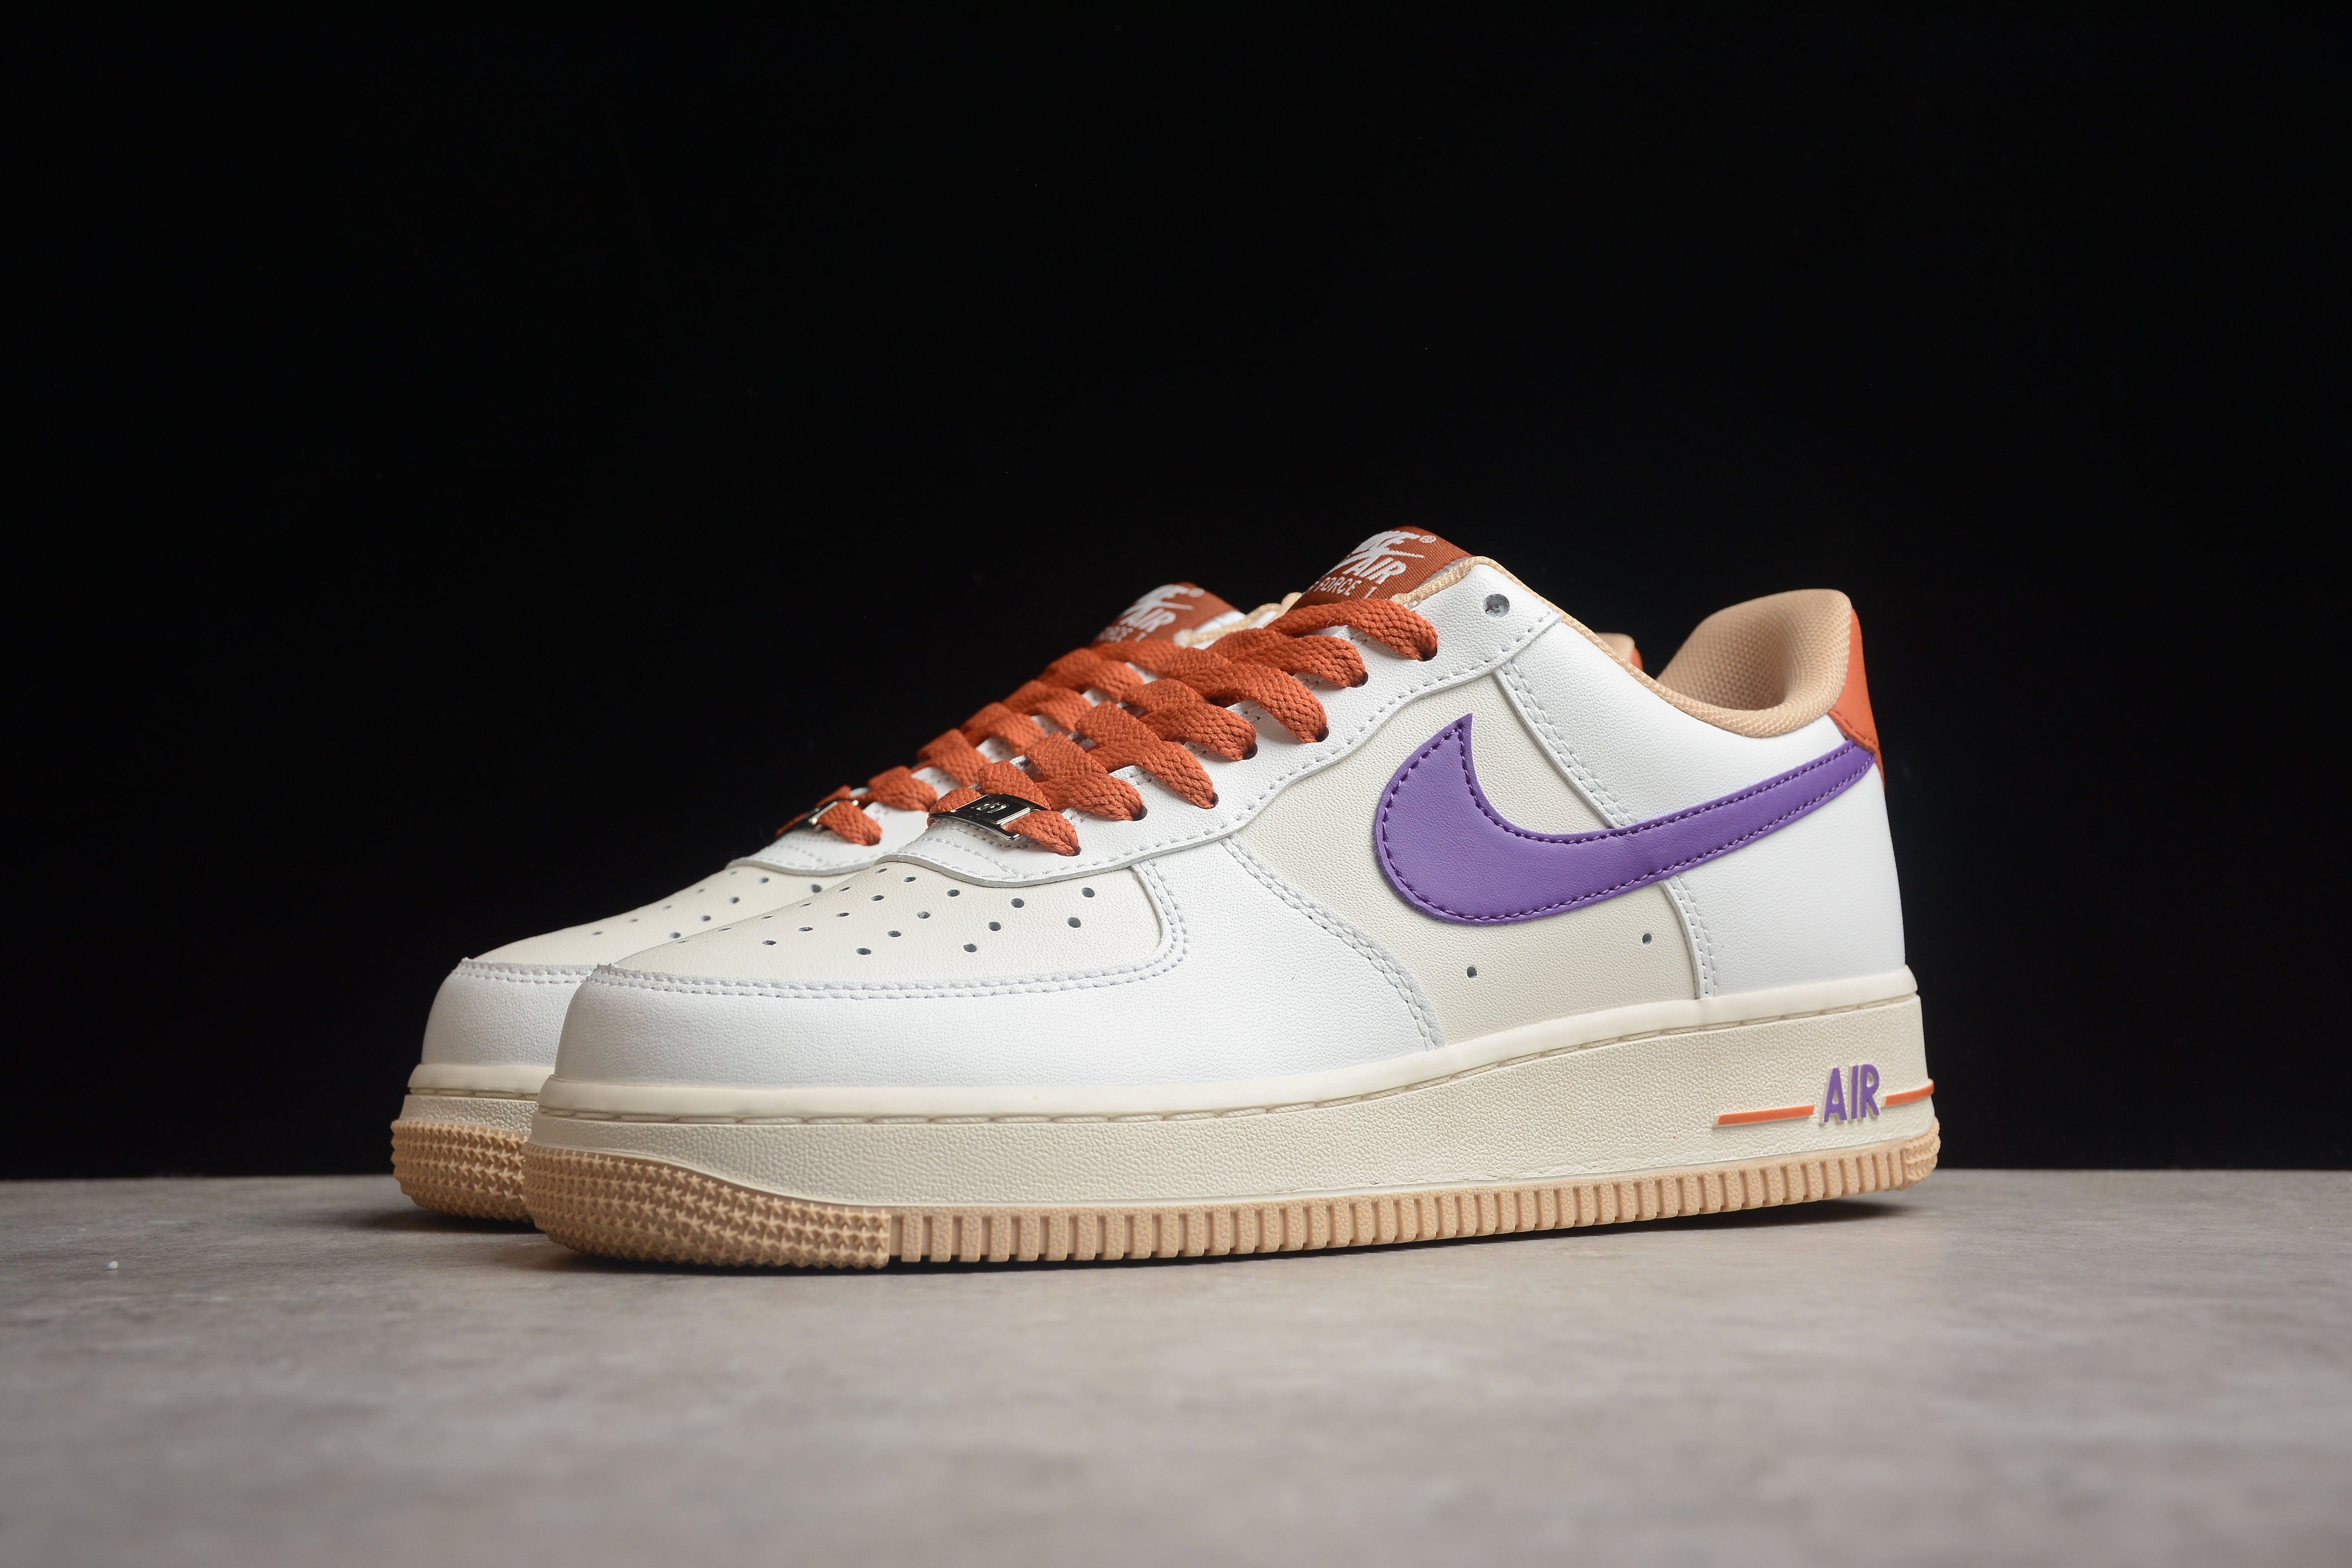 Nike airforce A1 purple and orange shoes